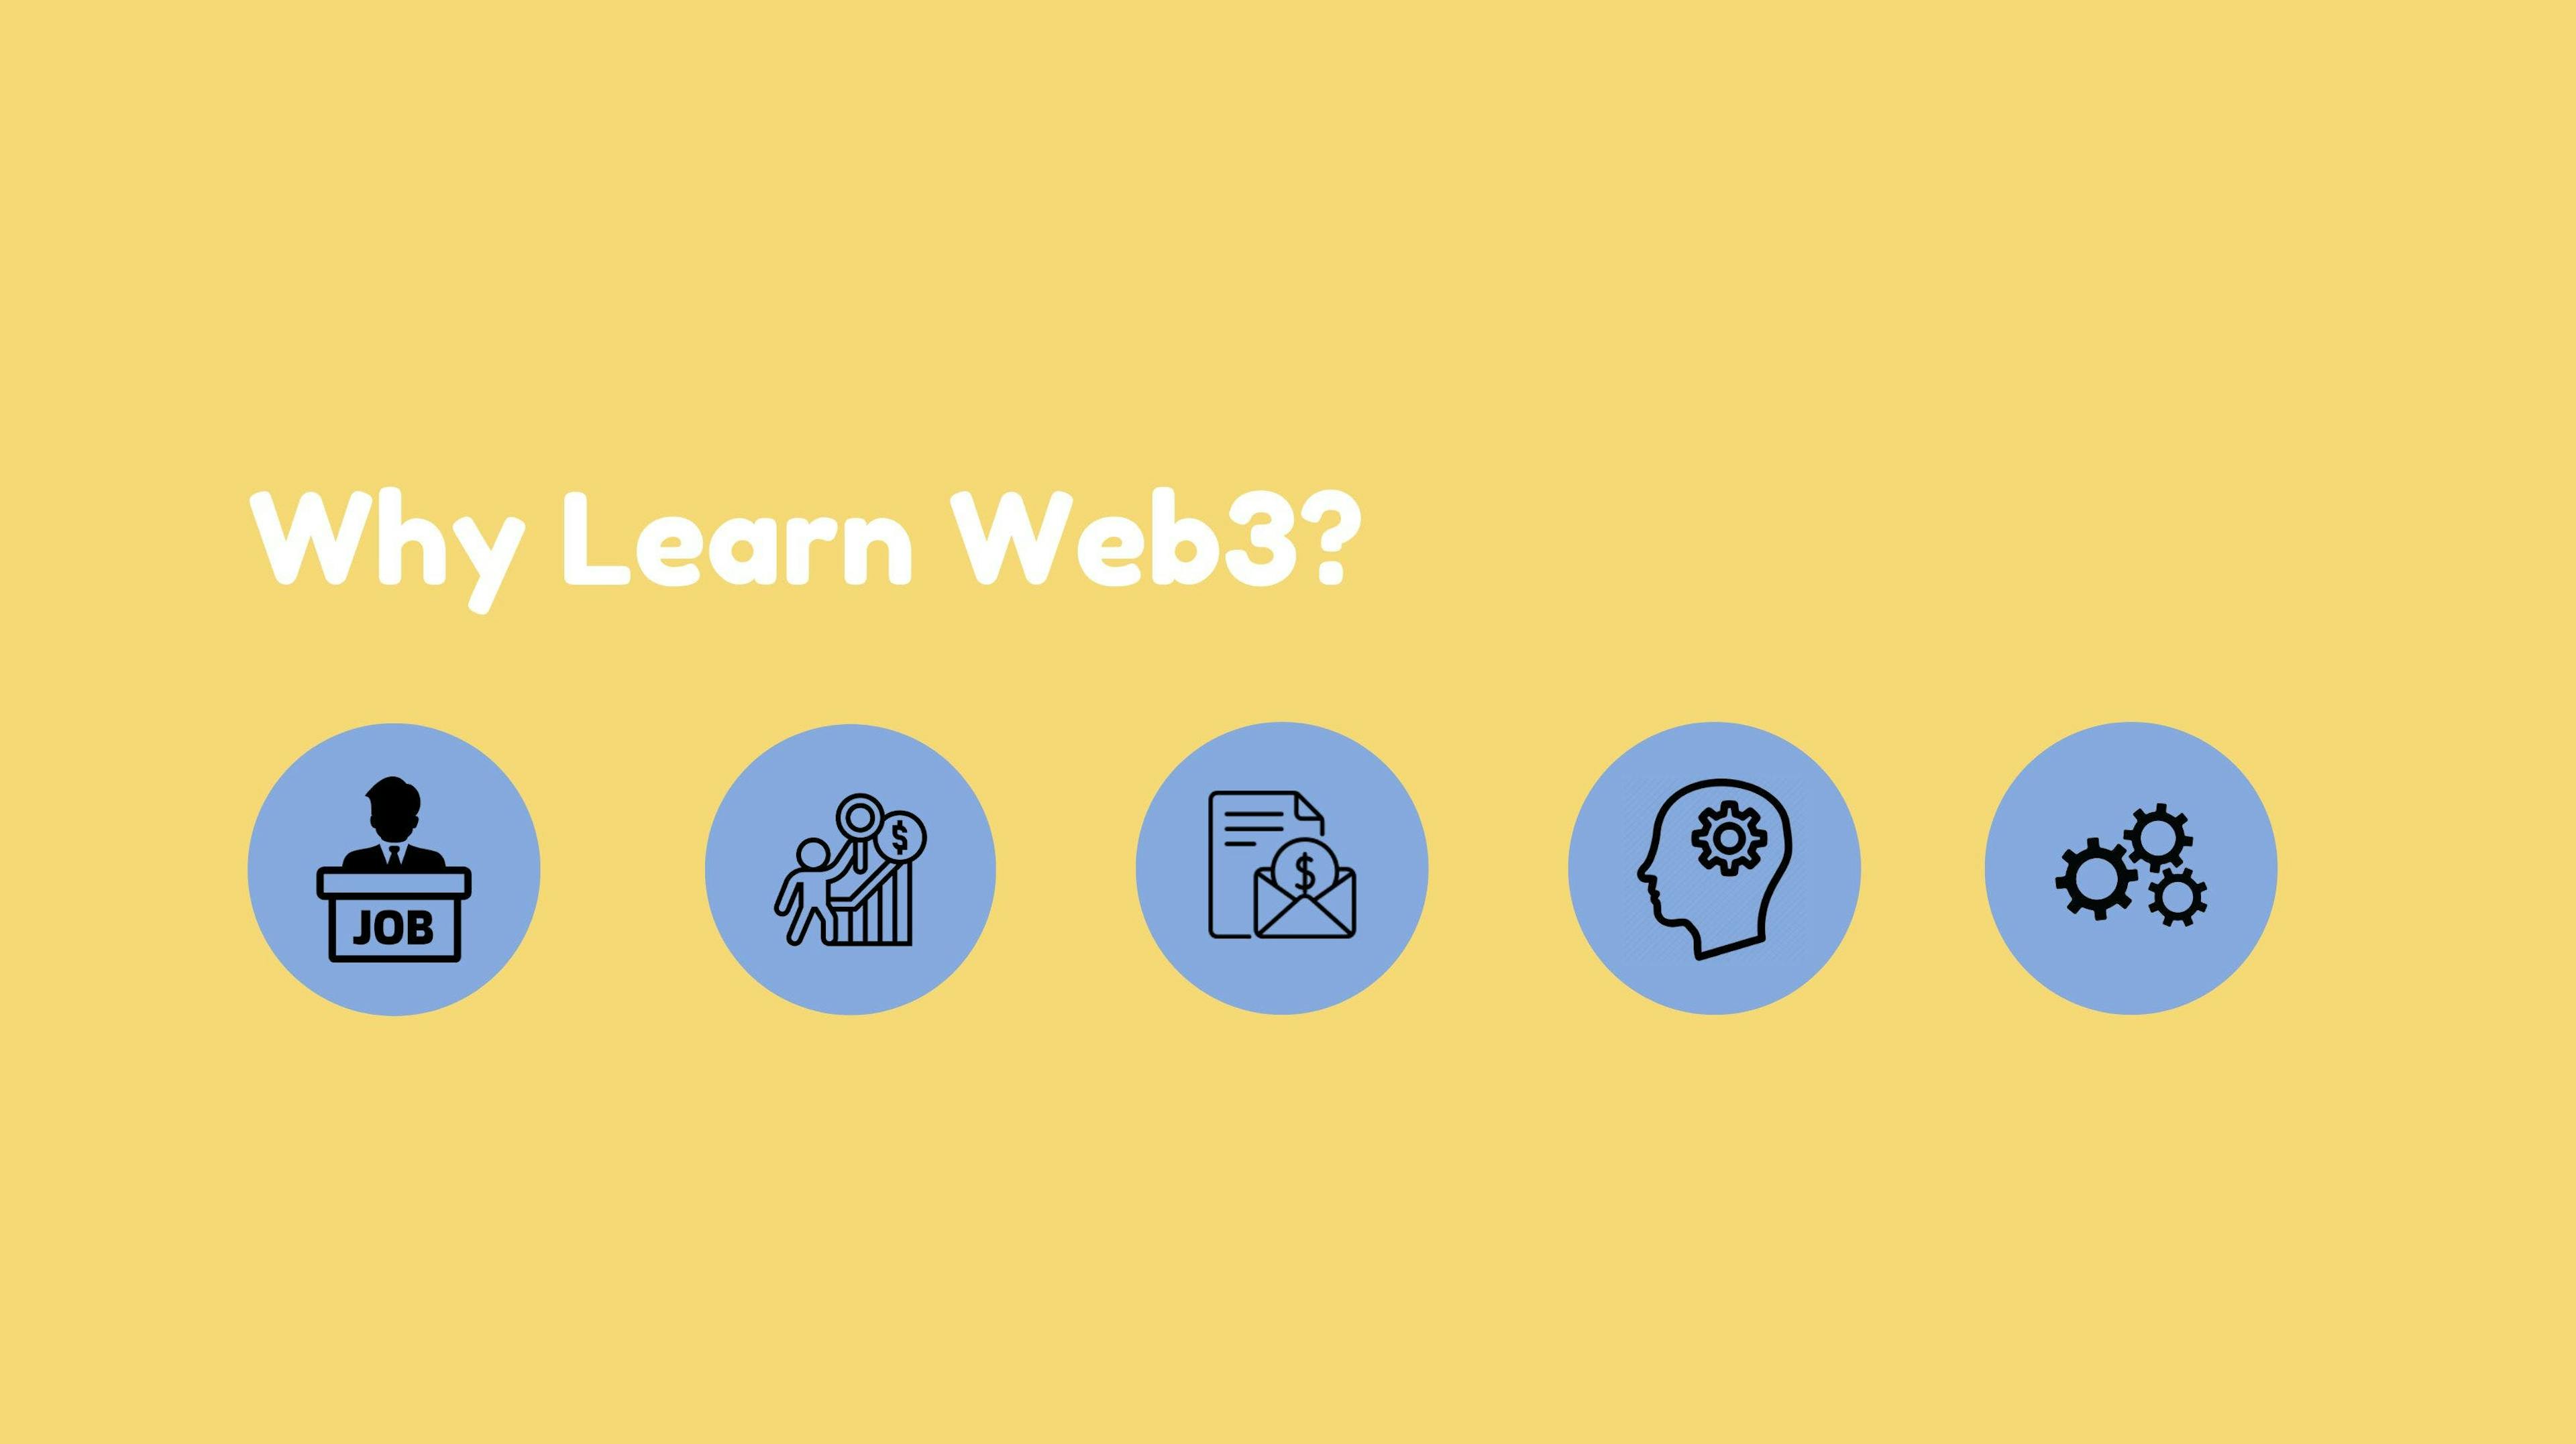 Why Learn Web3?